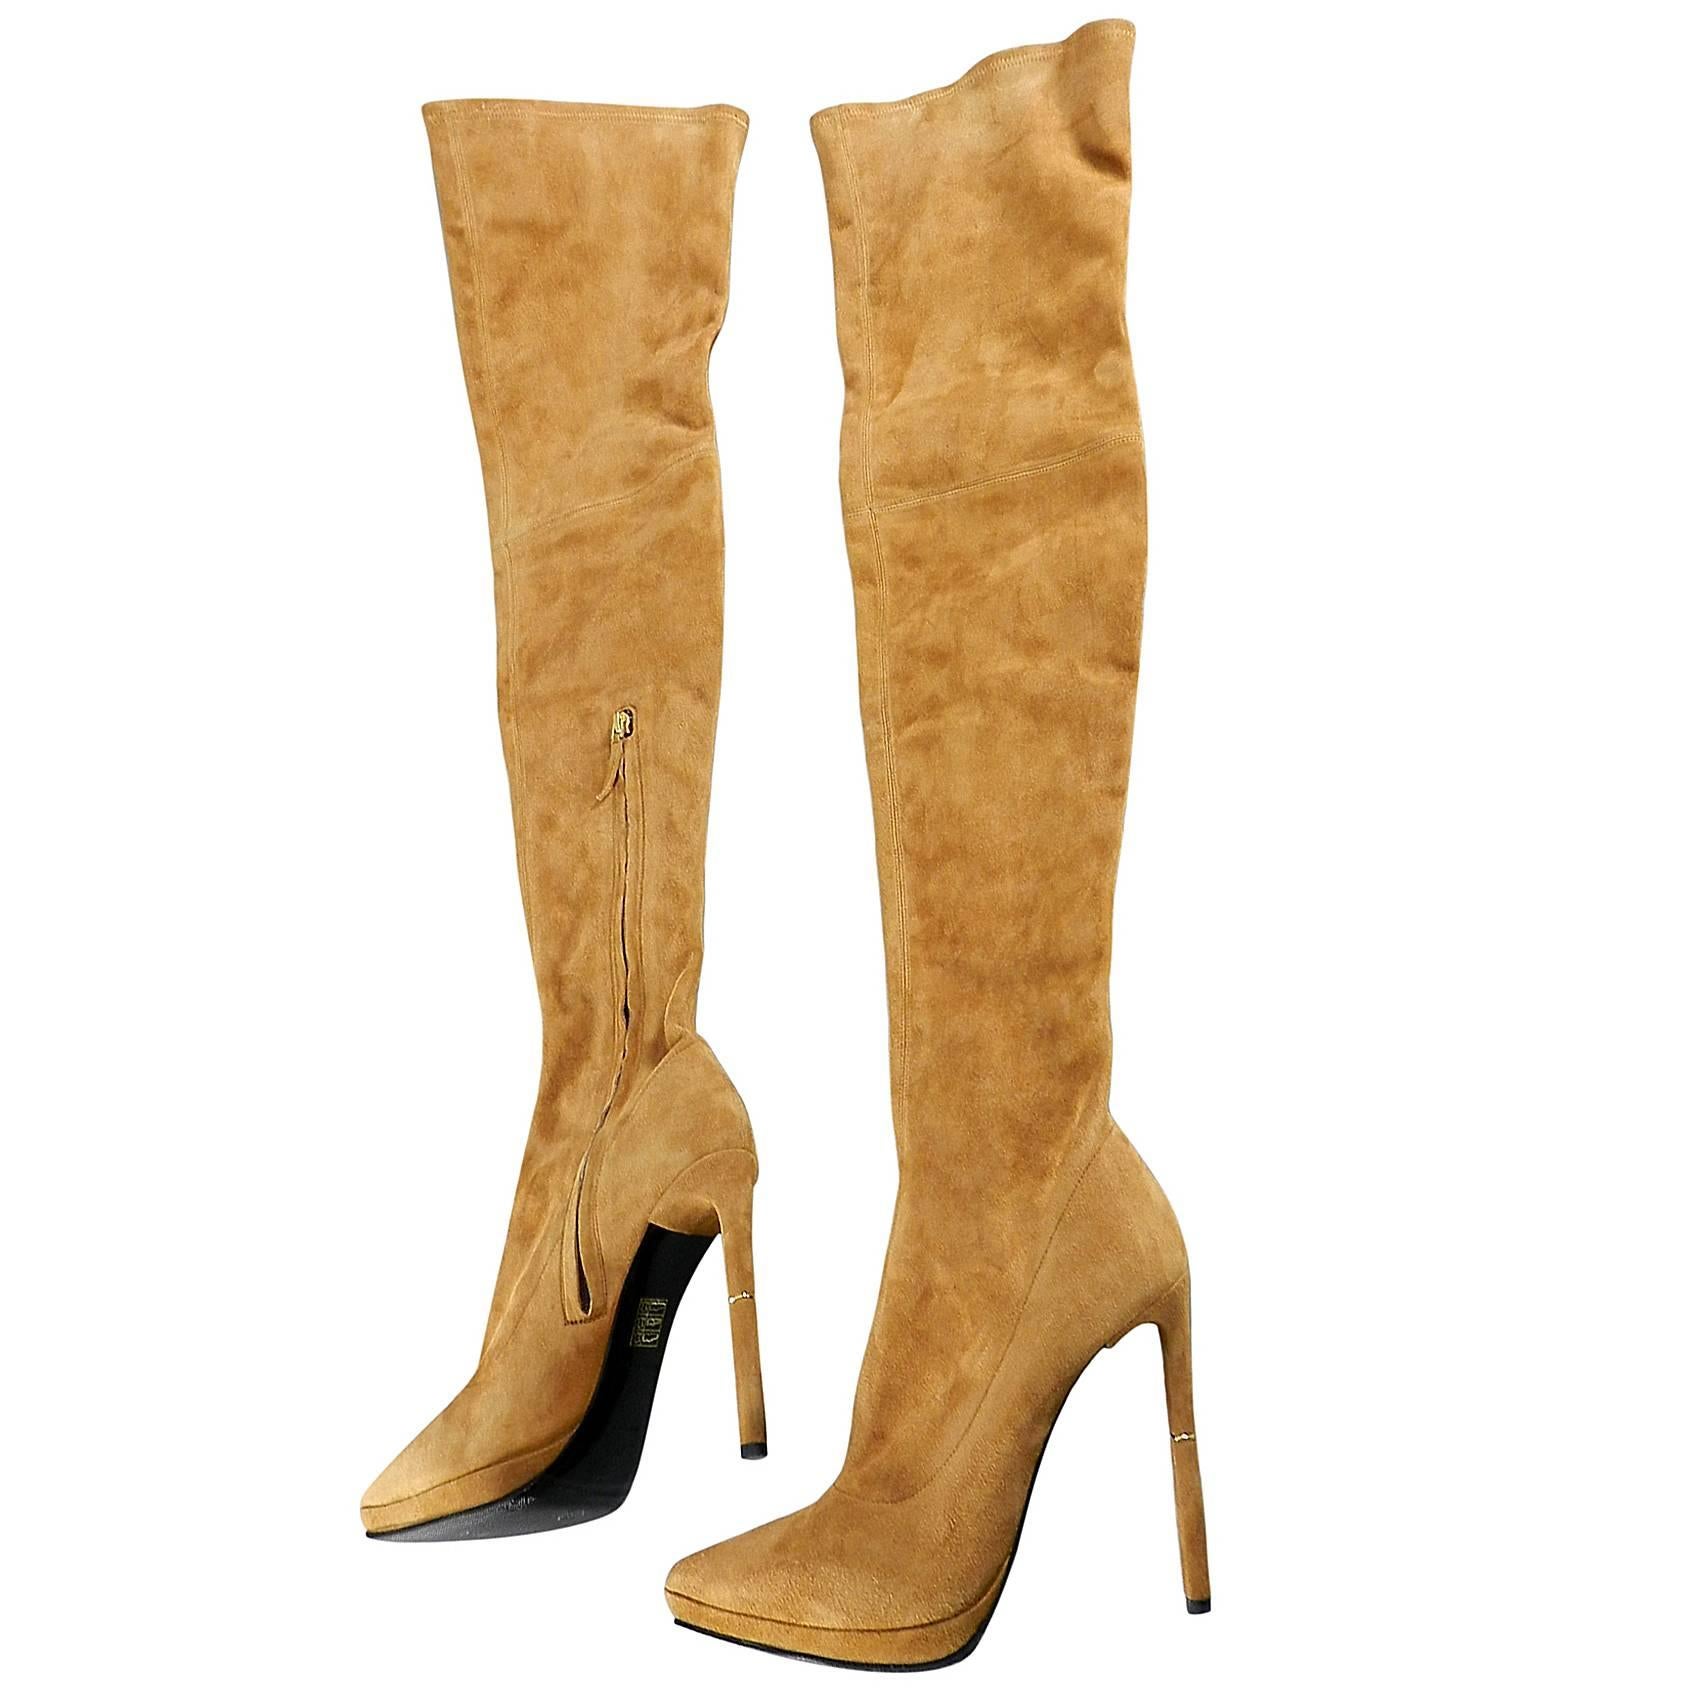 Emilio Pucci Fall 2013 Runway Tan Suede Over the Knee High Heel Boots